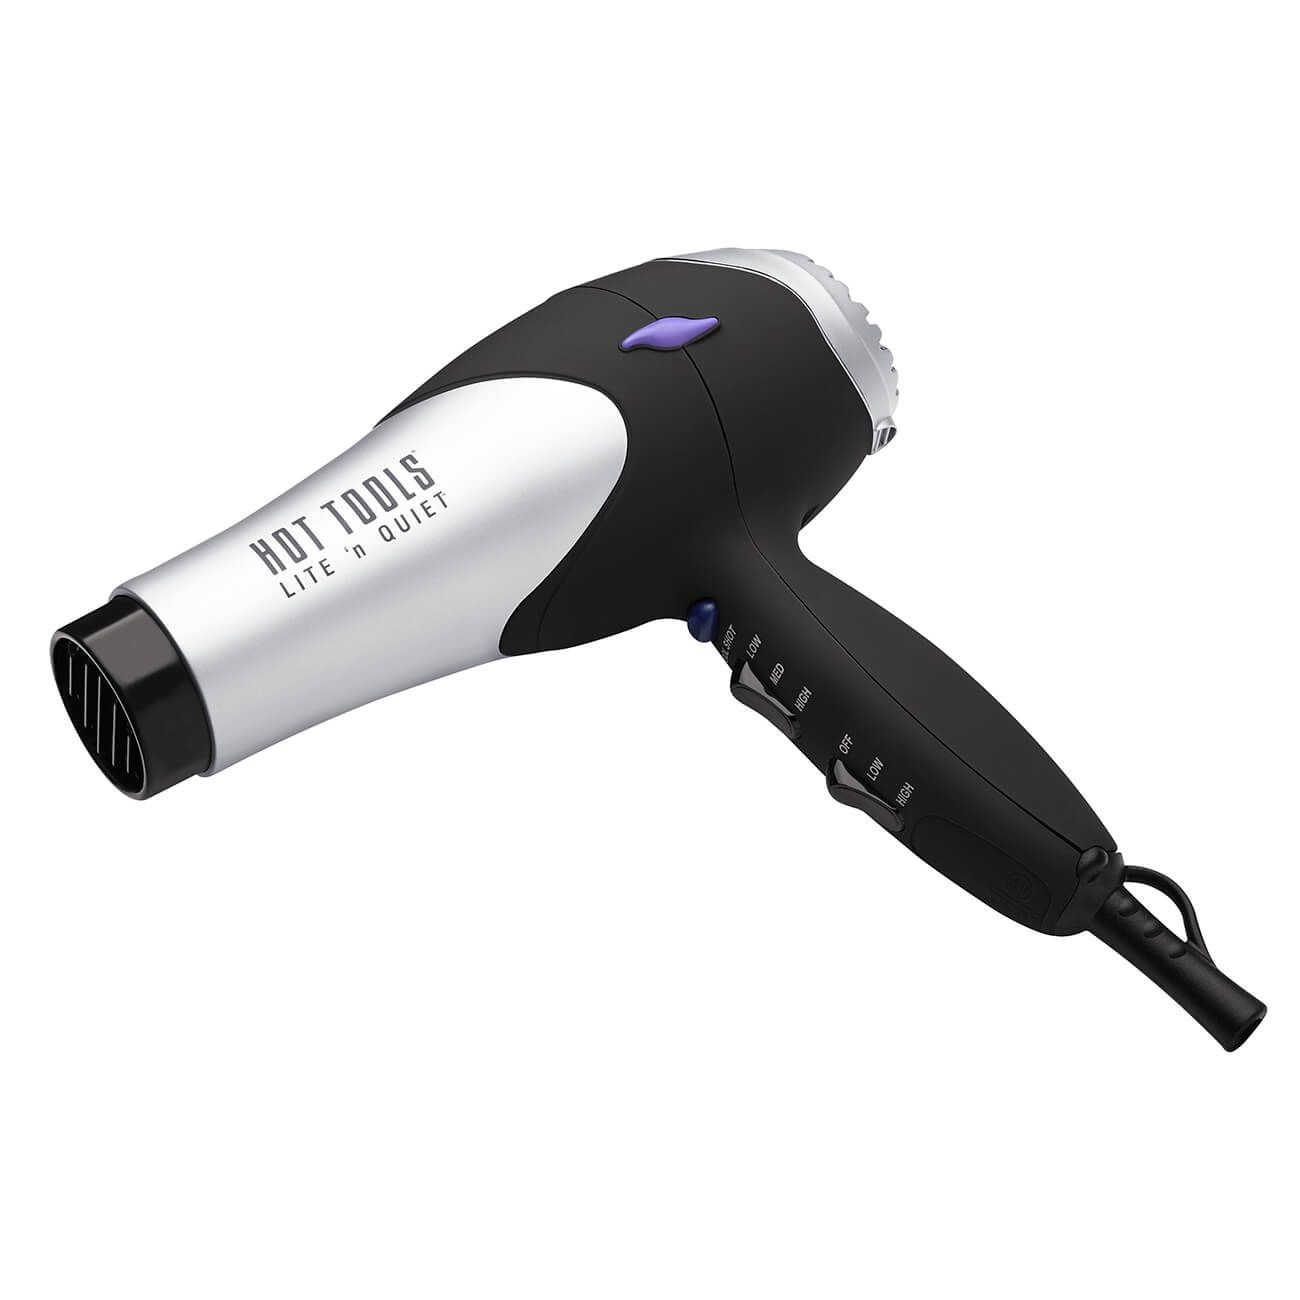 Hot Tools Turbo Blow Dryer - American Pro Hair Care